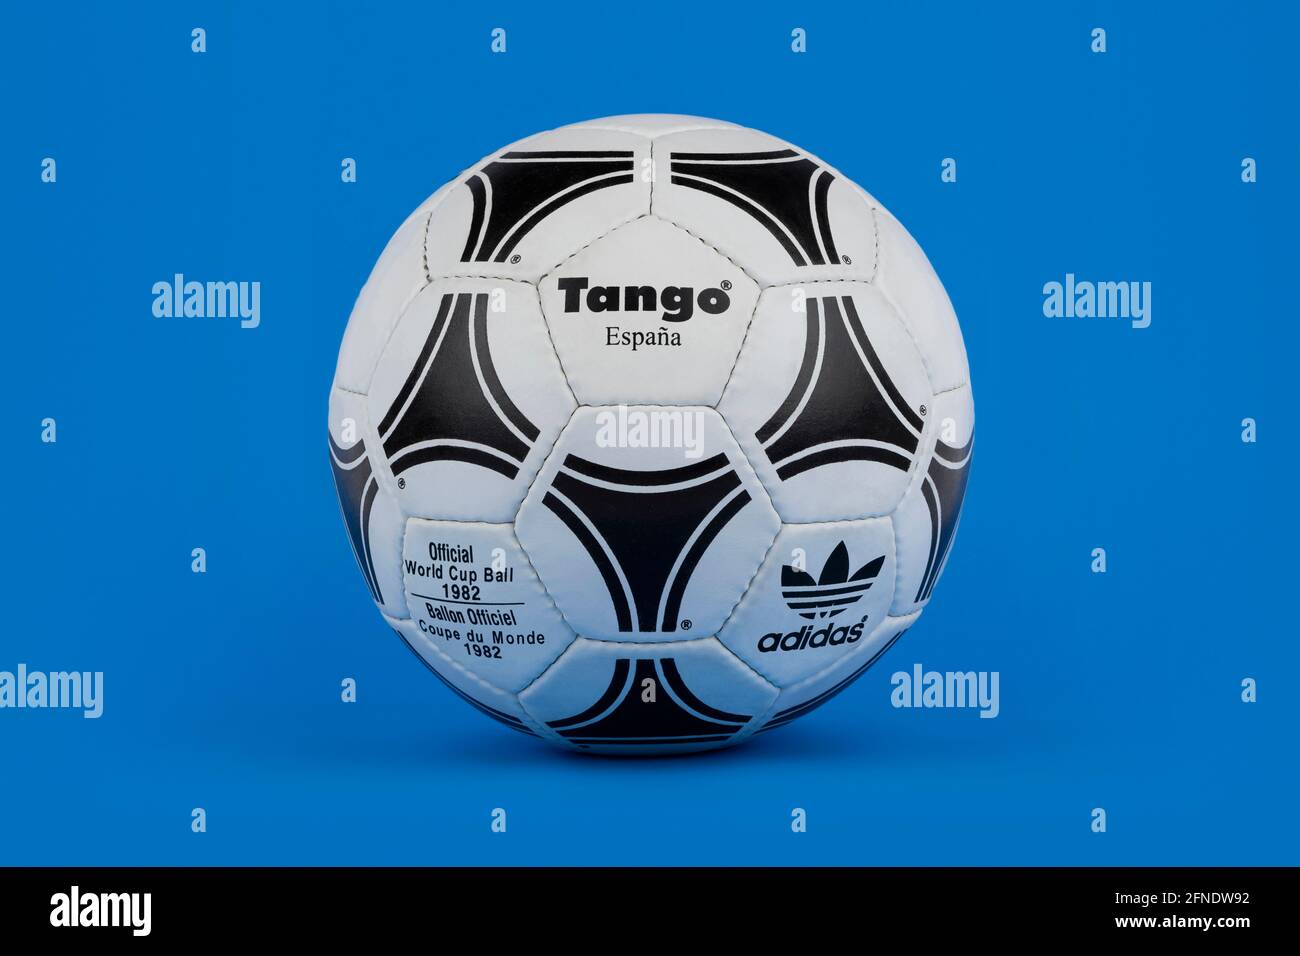 Adidas High Resolution Stock Photography and Images - Alamy